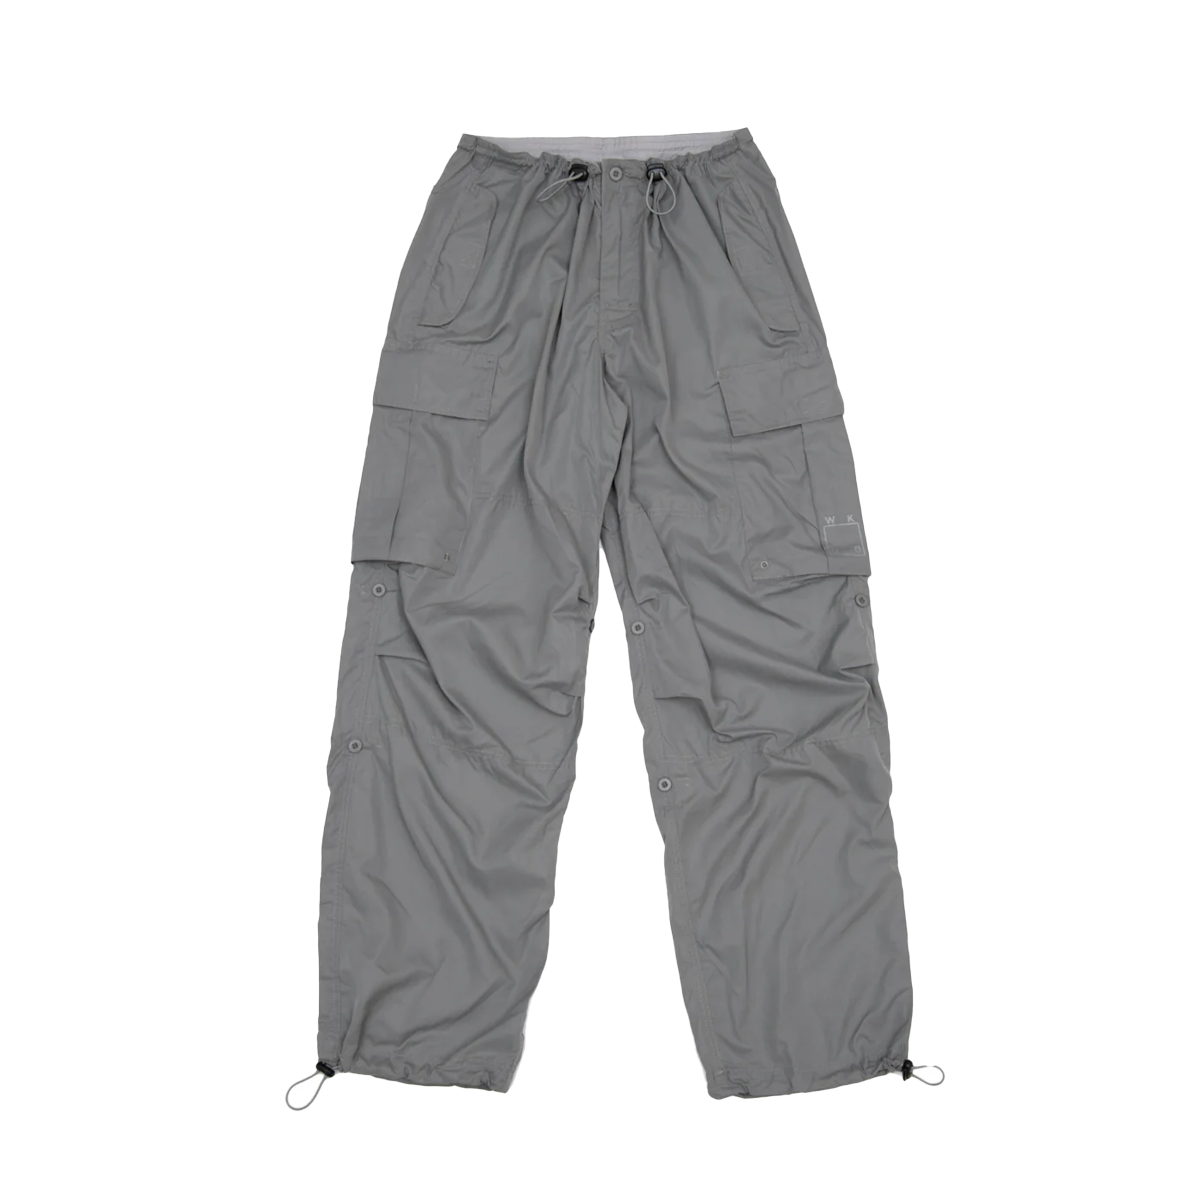 WKND Techie Dirtbags Pants - Silver